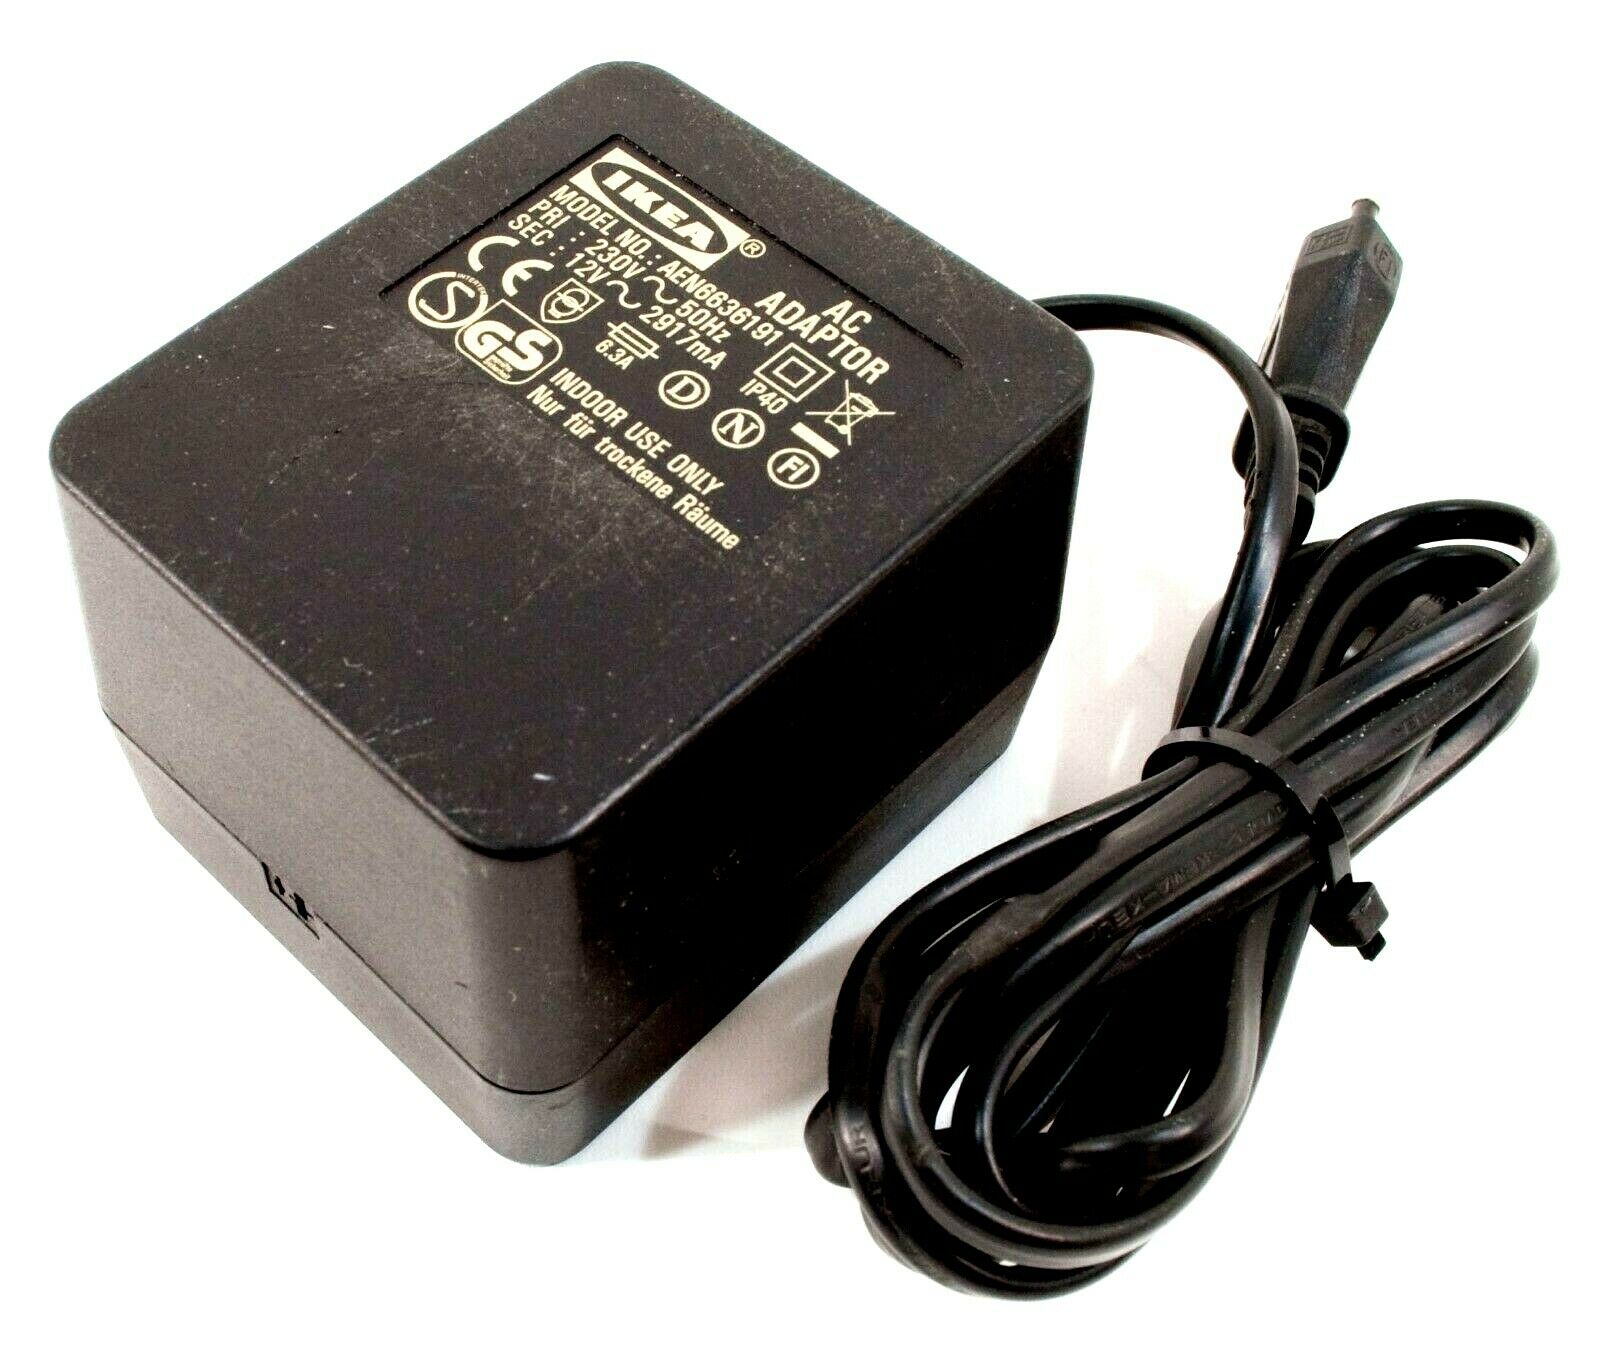 Ikea AEN6636191 AC-AC Adapter 12V 2917mA Original Power Supply Type: Power Adapter UPC: Does not apply Compatible B